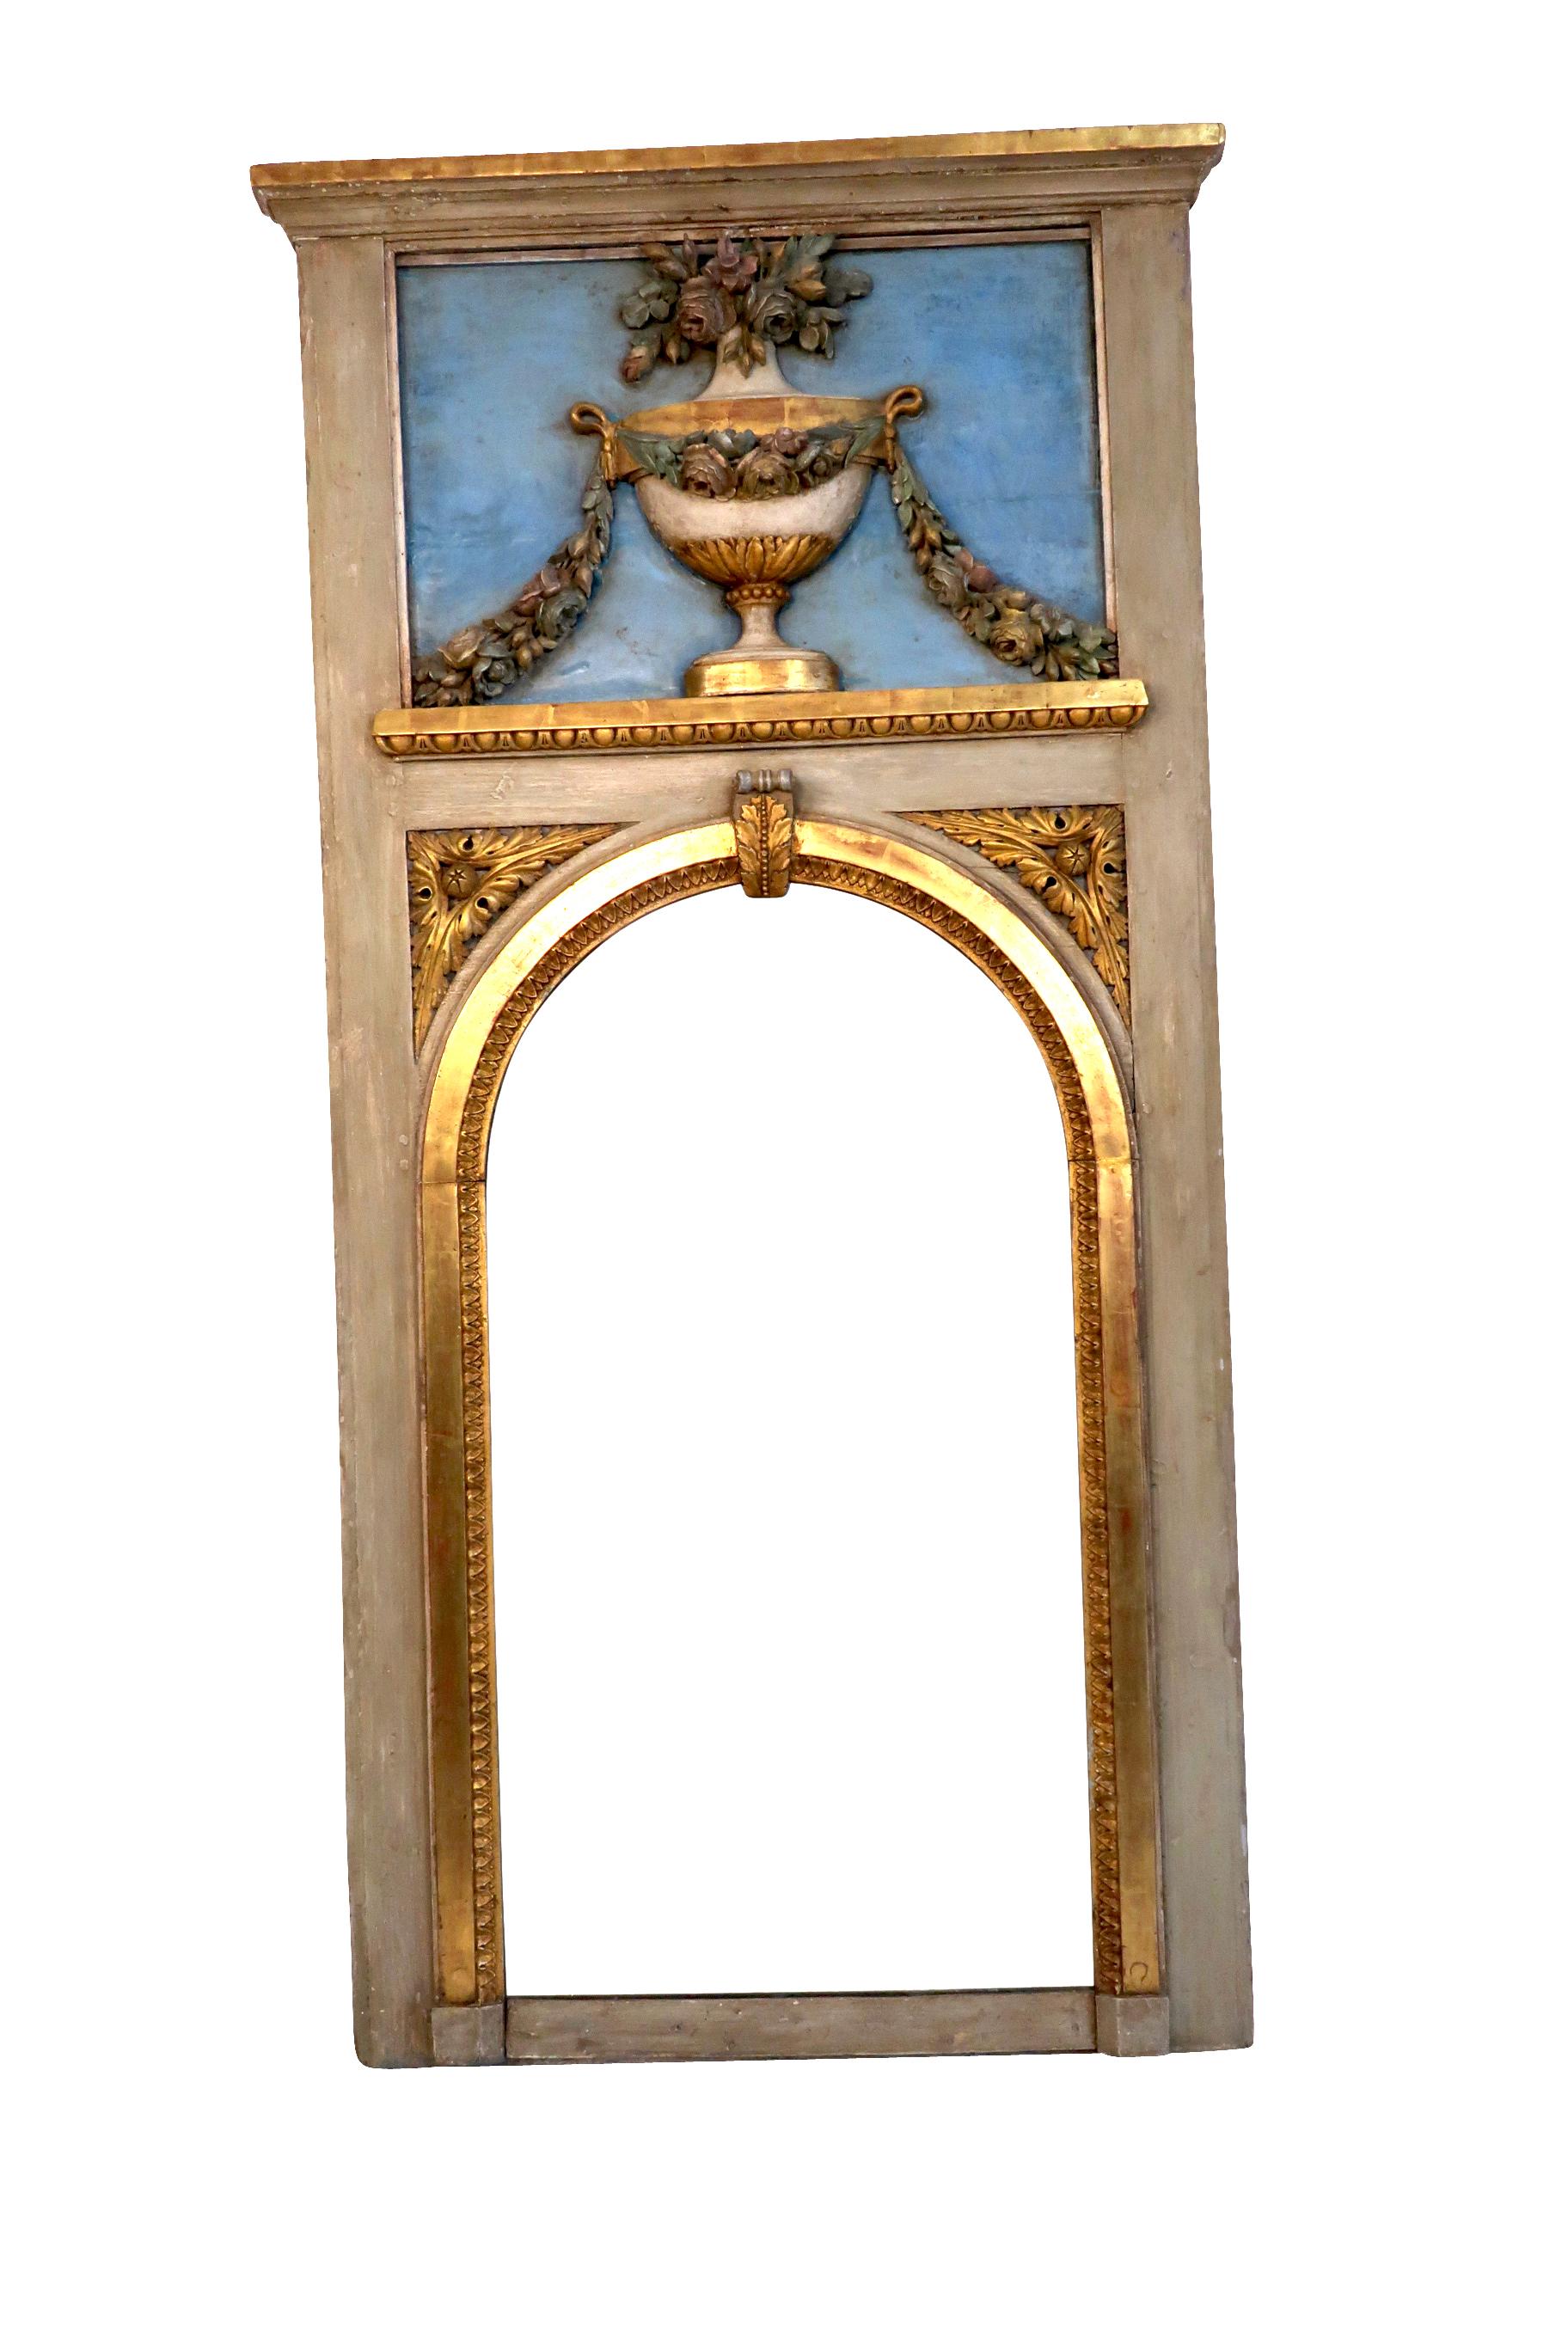 19th Century Blue Trumeau Mirror with Urn, Garland and Floral Decoration  For Sale 3